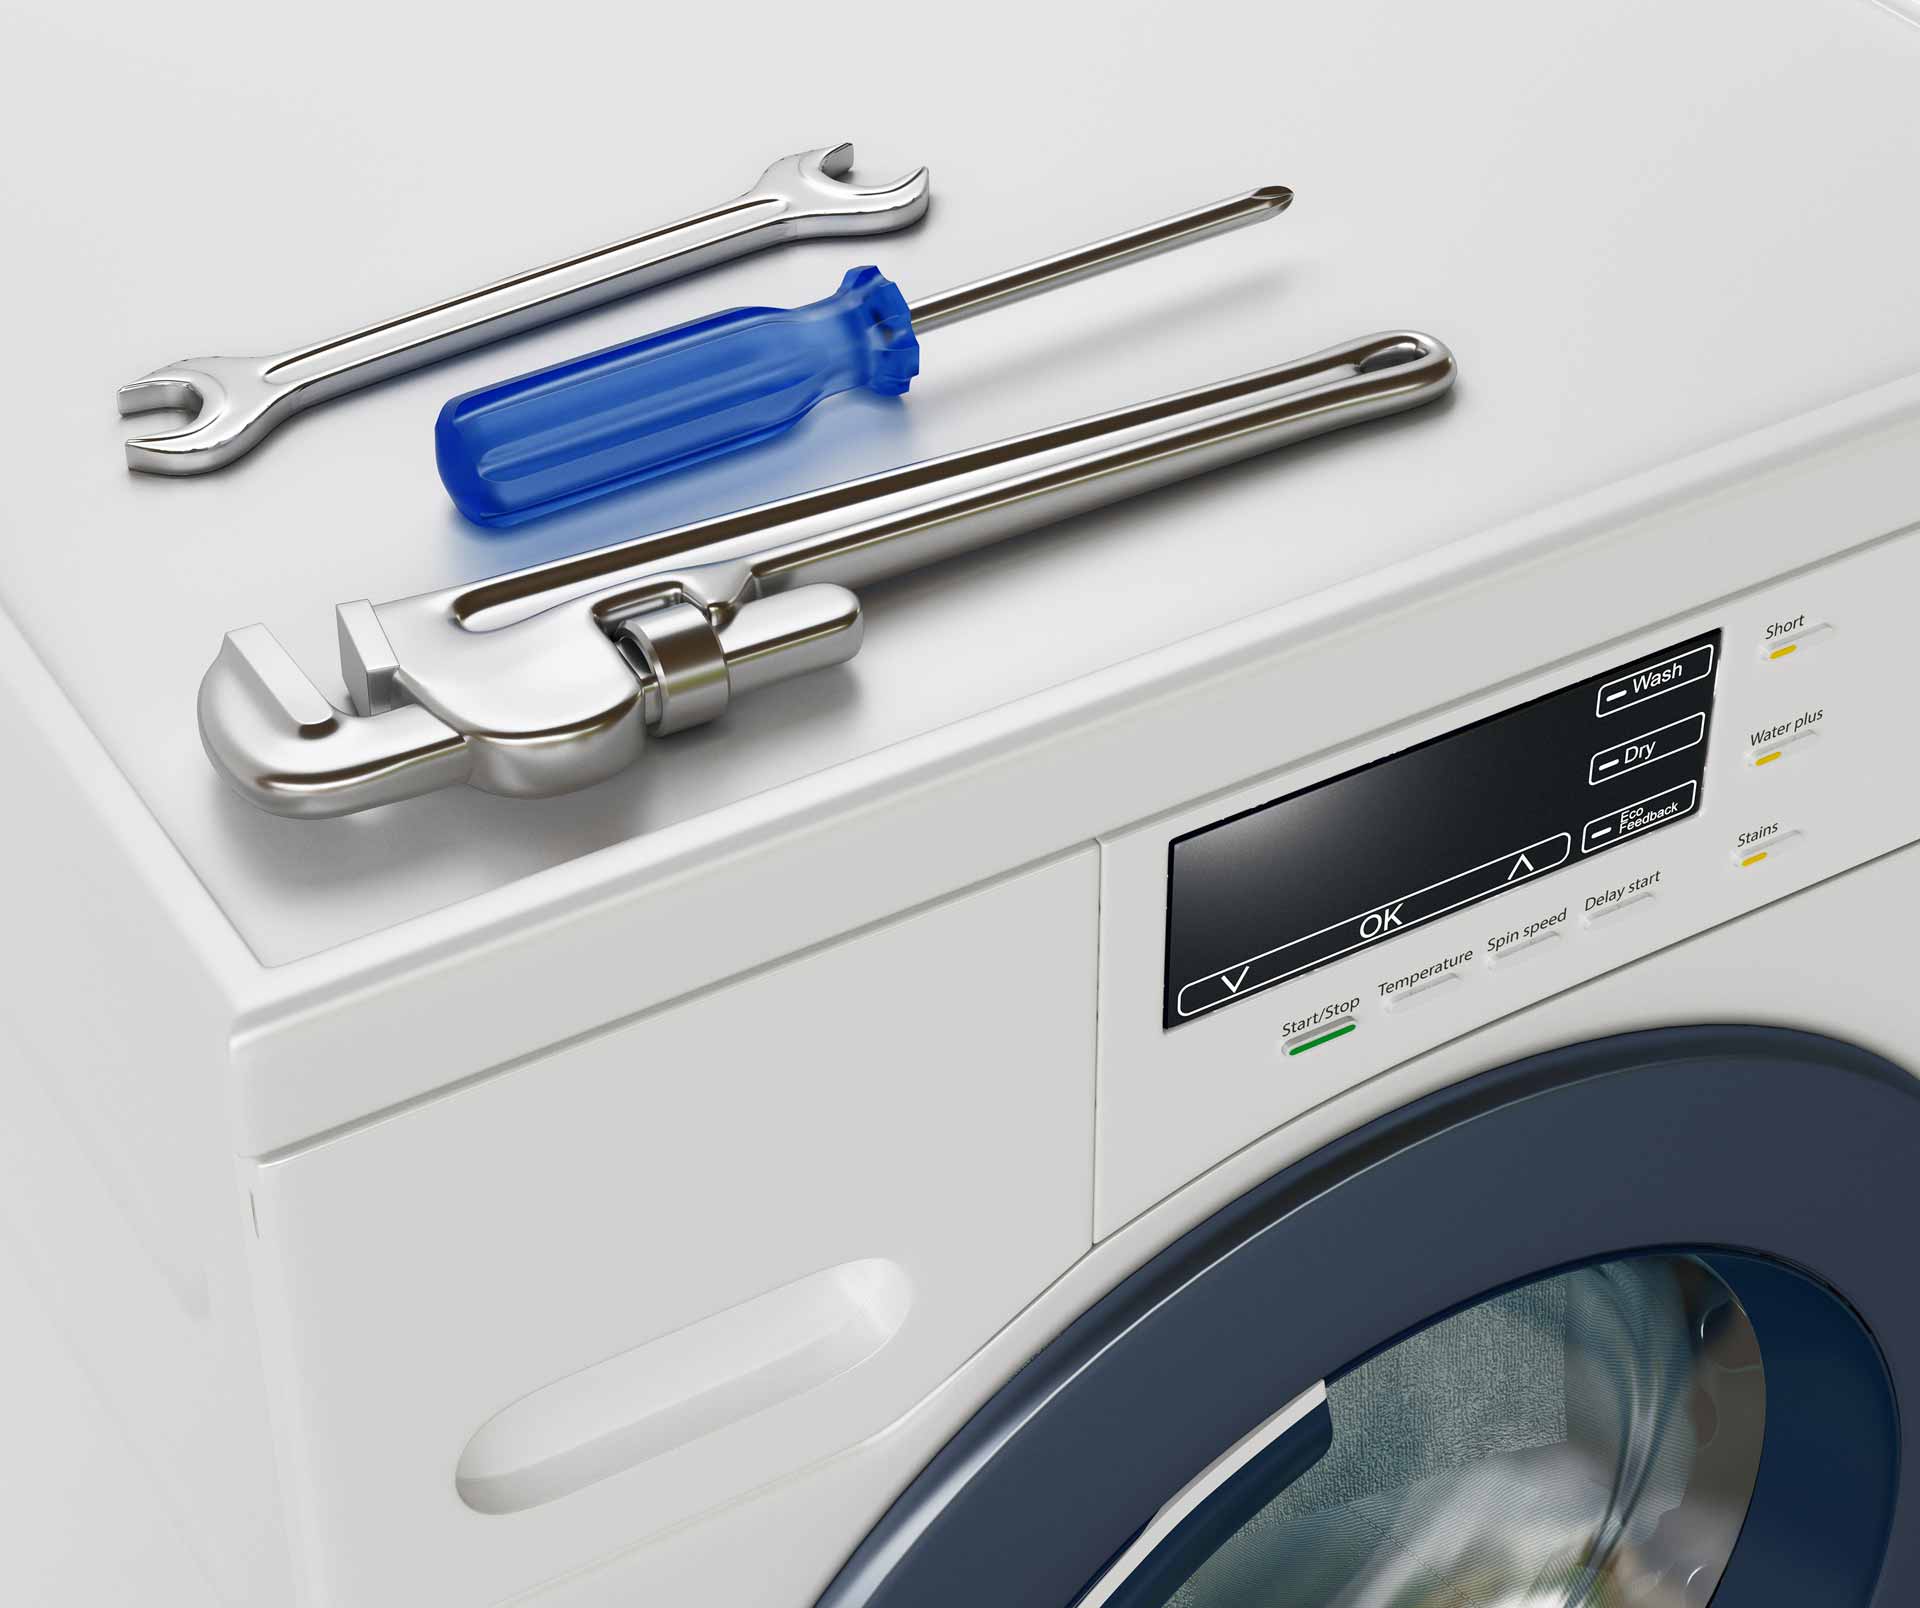 Two wrenches and a screwdriver resting on top of a washer/dryer